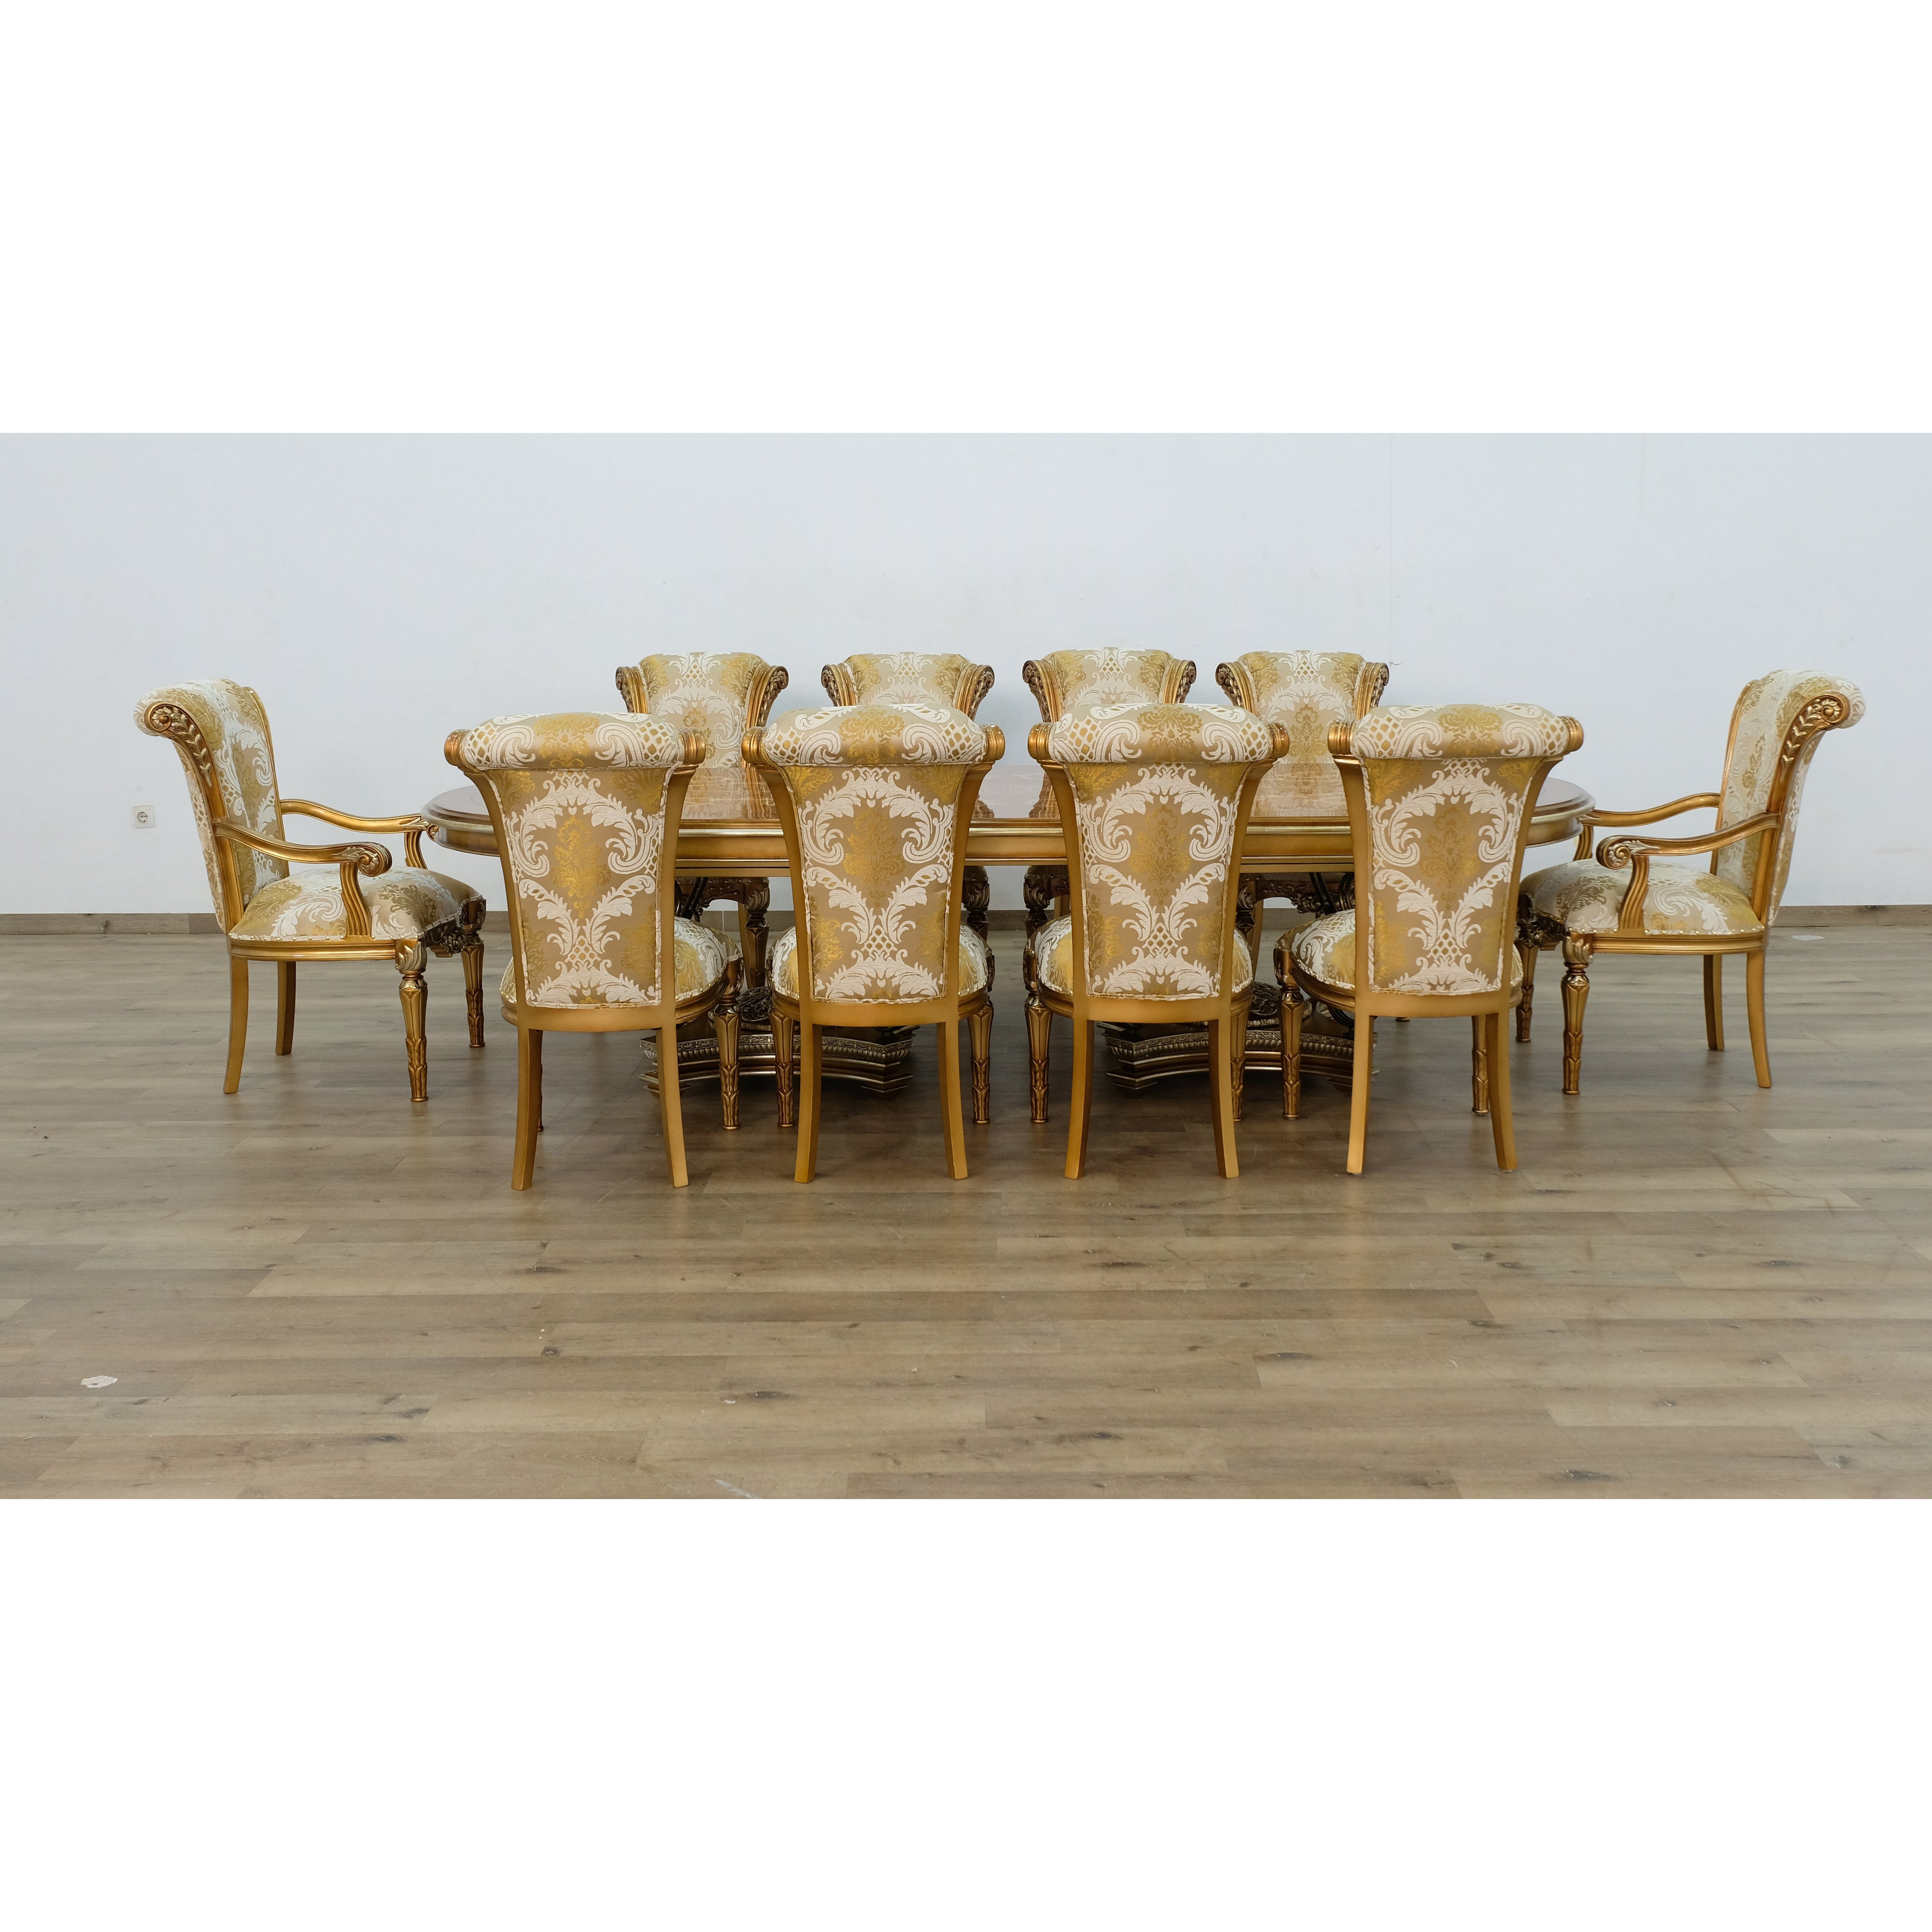 European Furniture - Valentina 11 Piece Dining Room Set With Damask Fabric Chair - 51955-61957-11 SET - New Star Living